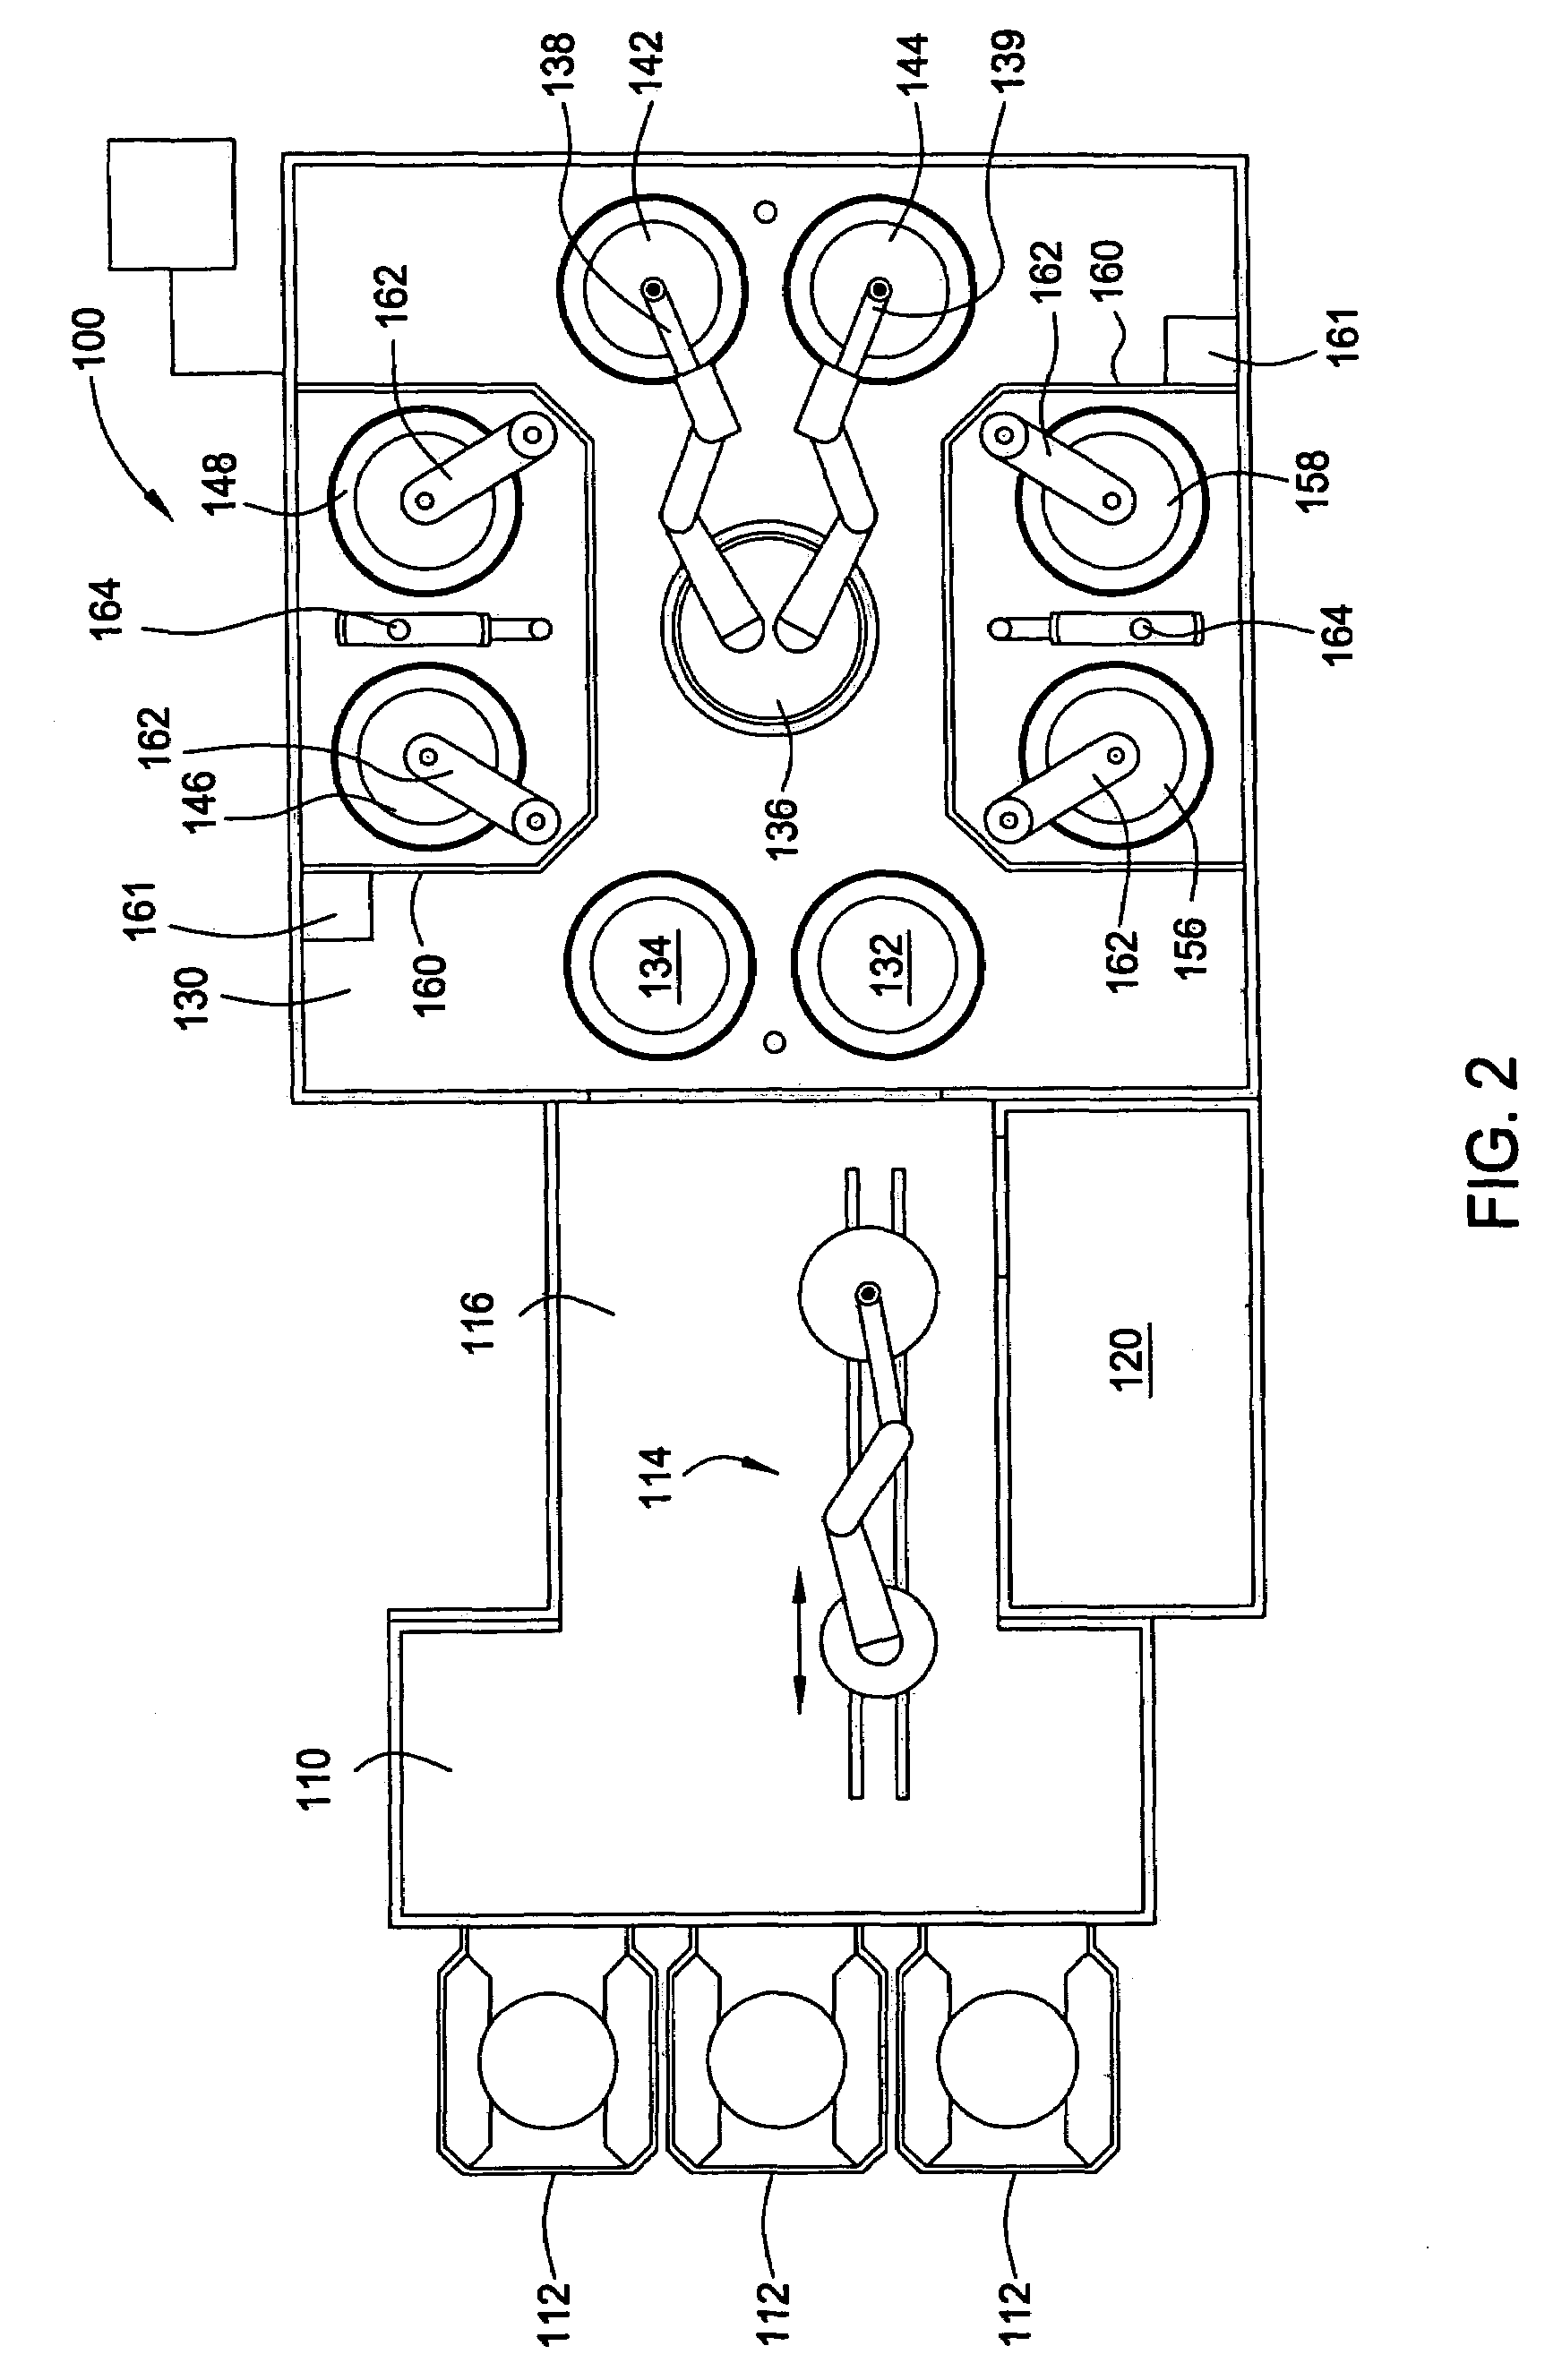 Pretreatment for electroless deposition